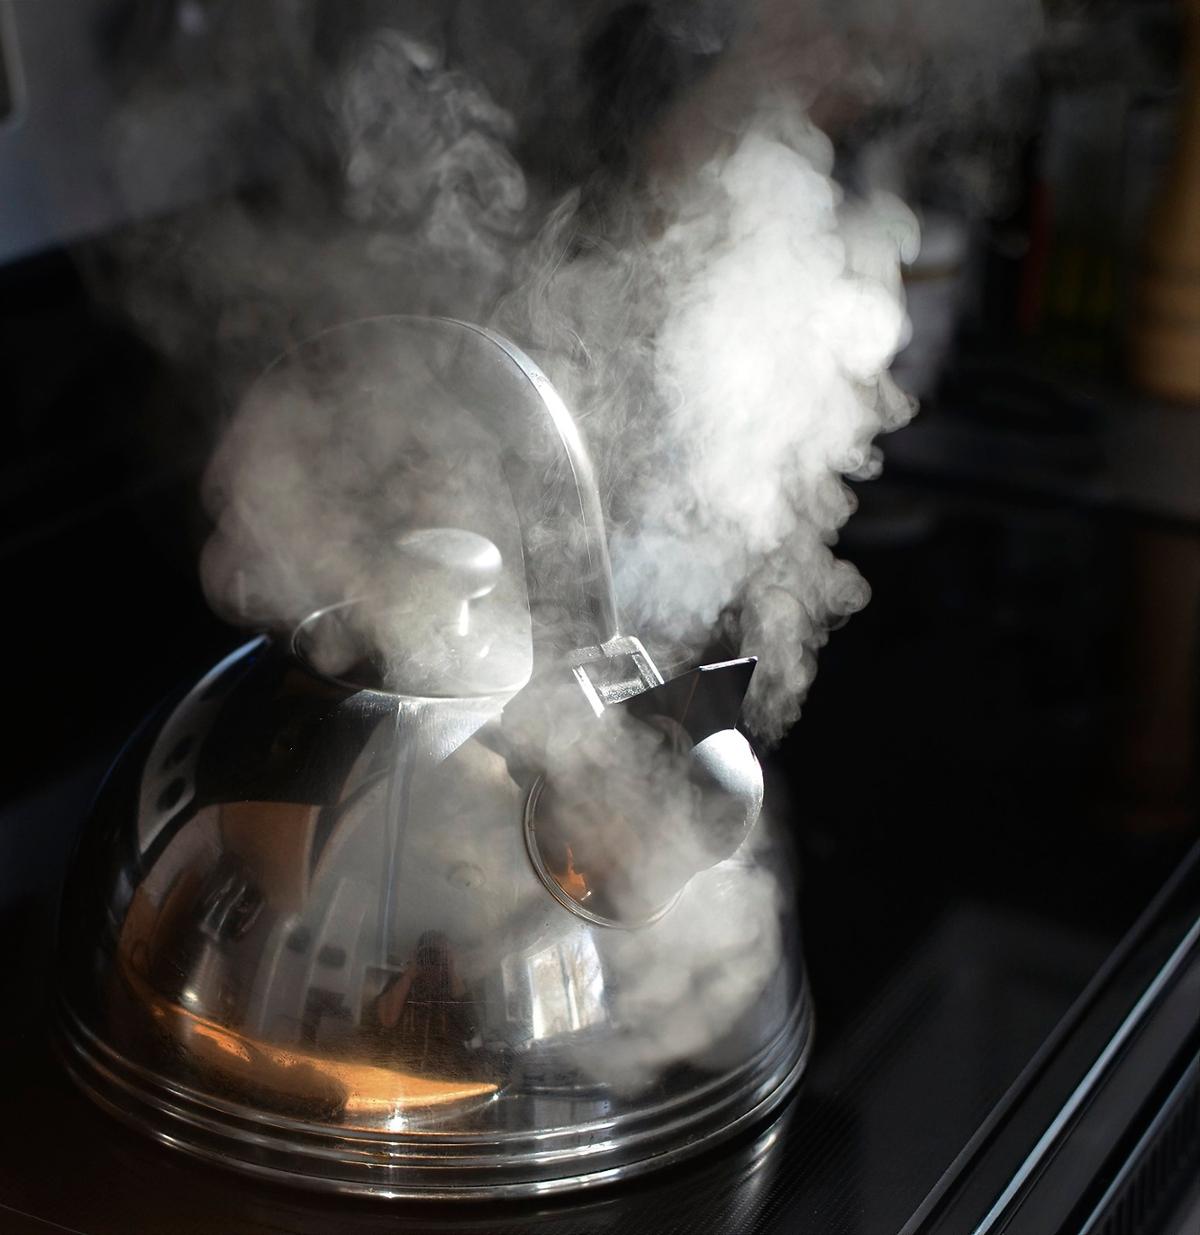 A kettle on a stovetop heating up, with visible steam clouds